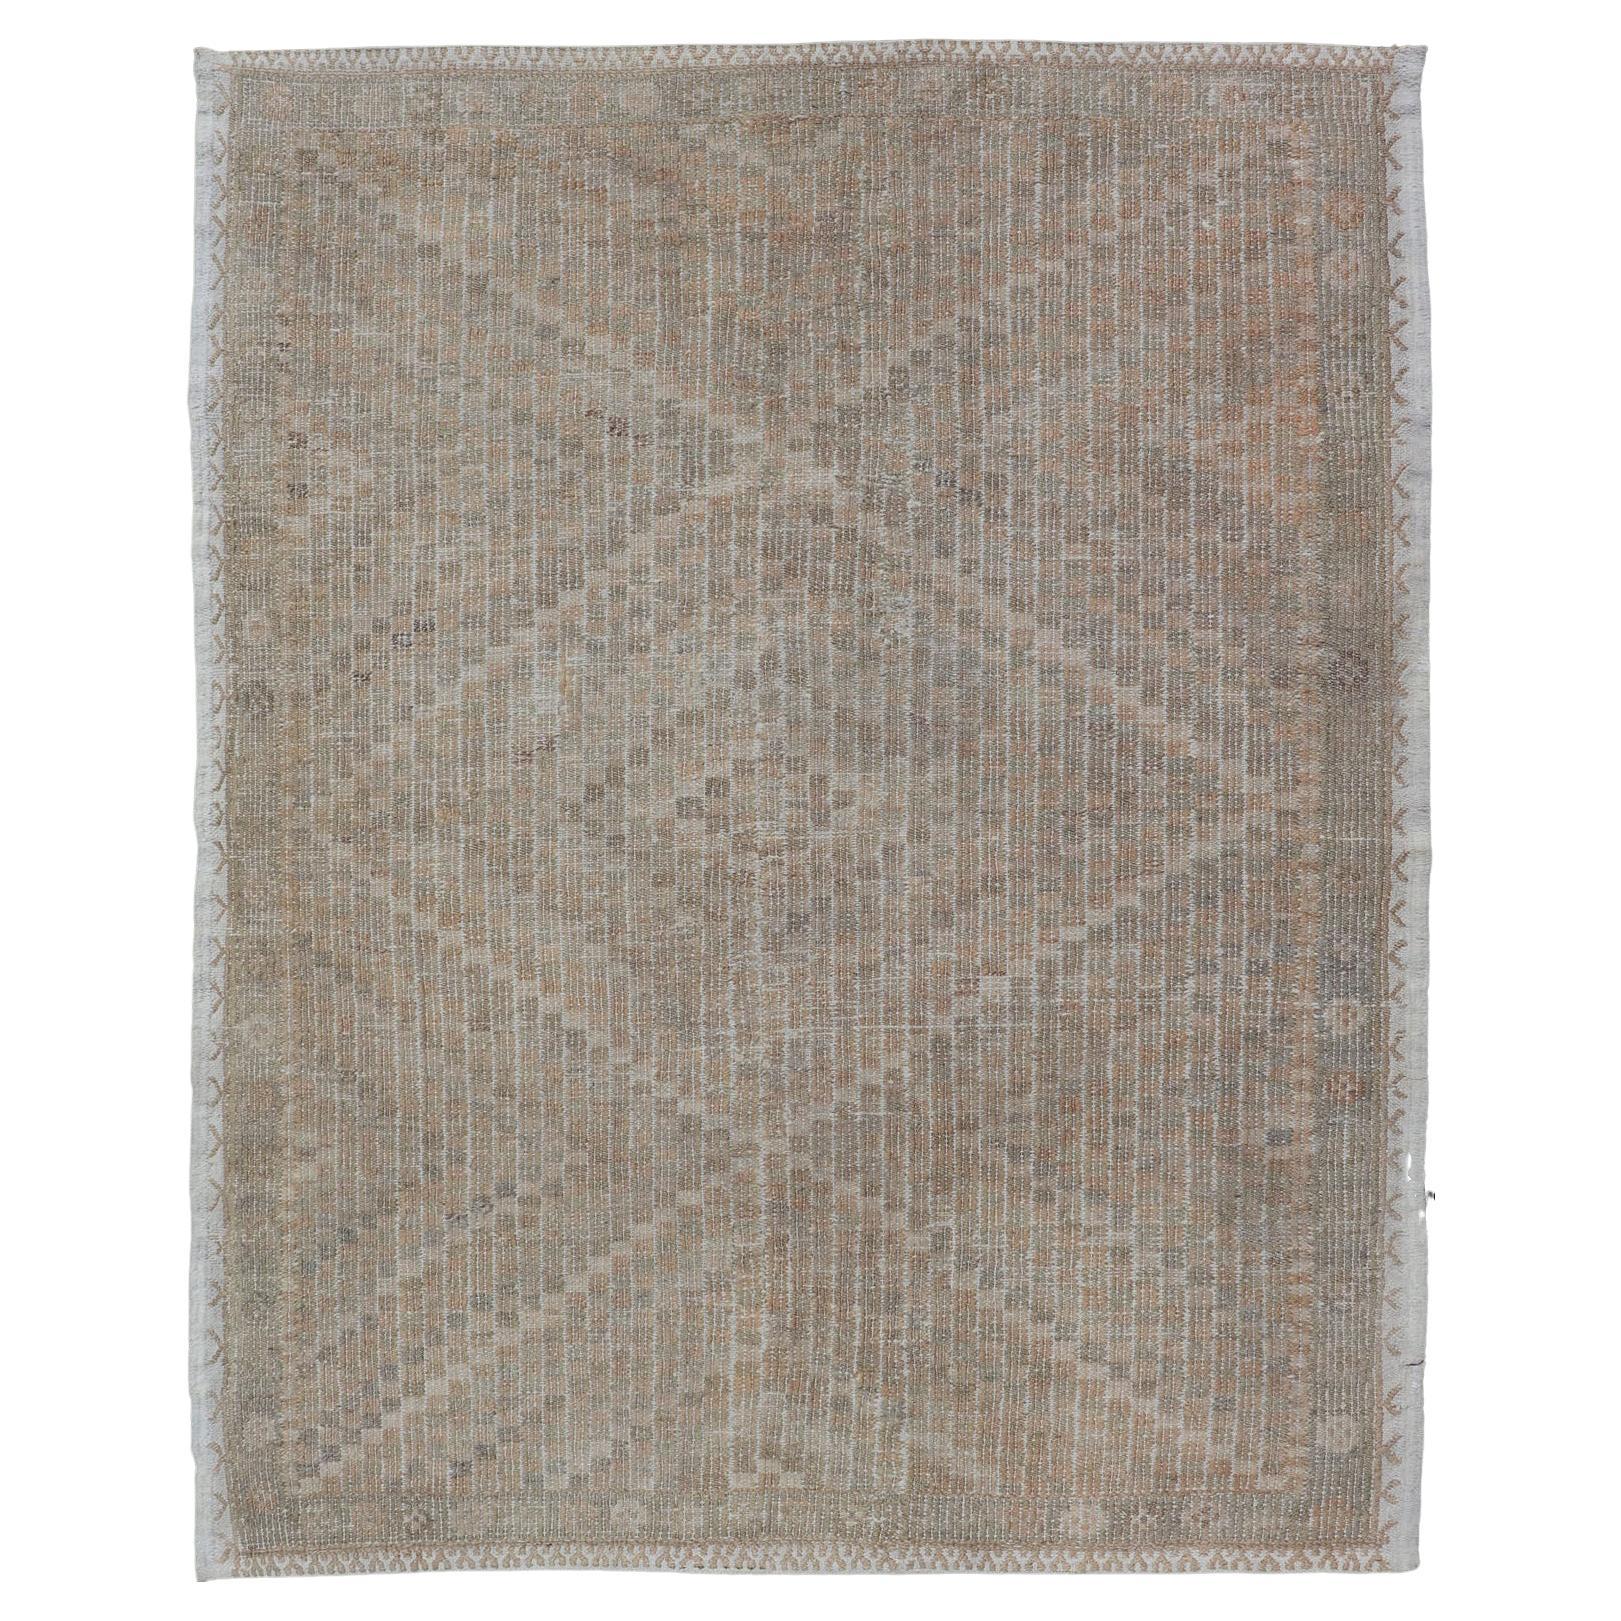 Vintage Turkish Embroidered Flat-Weave Rug in Diamond & Geometric Design For Sale